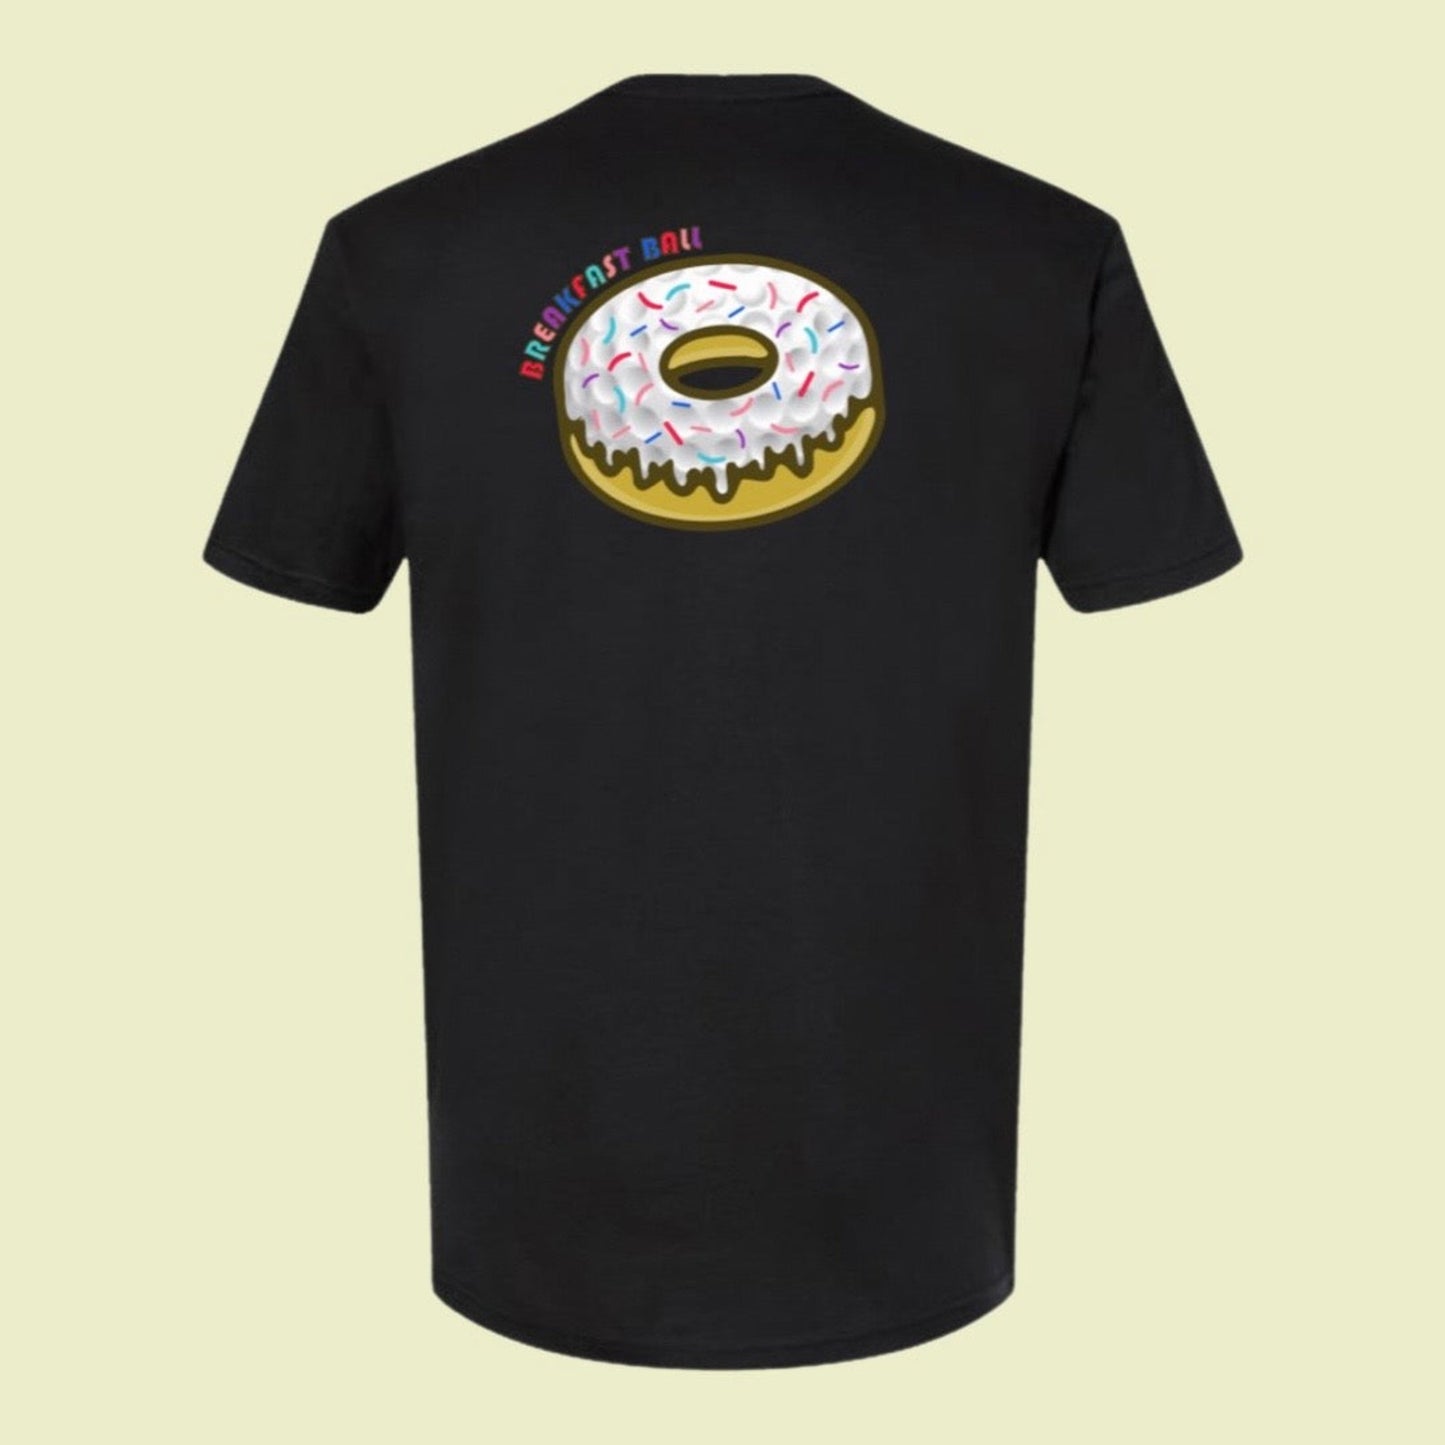 back of breakfast ball golf shirt in black with donut golf ball graphic in multiple colors